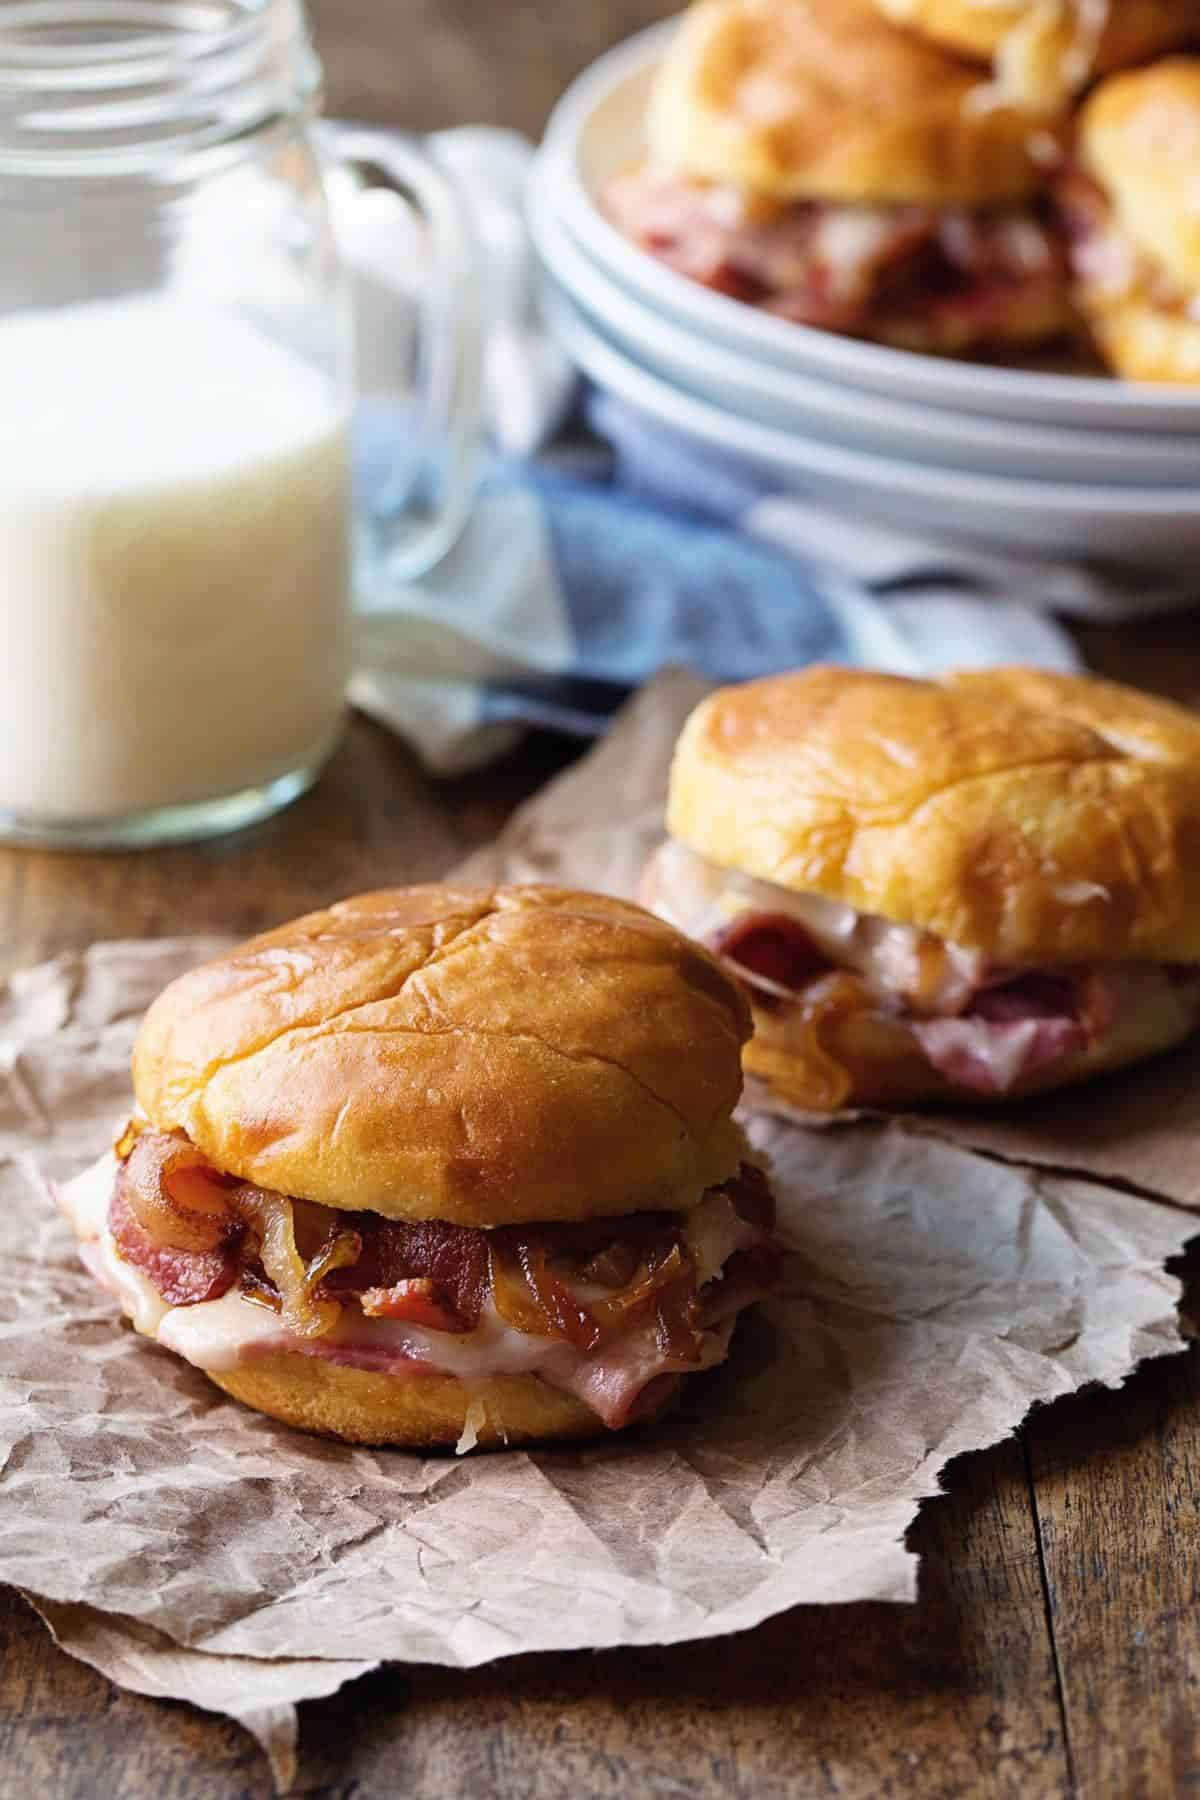 Hot Ham and Cheese Sandwiches on brown paper.